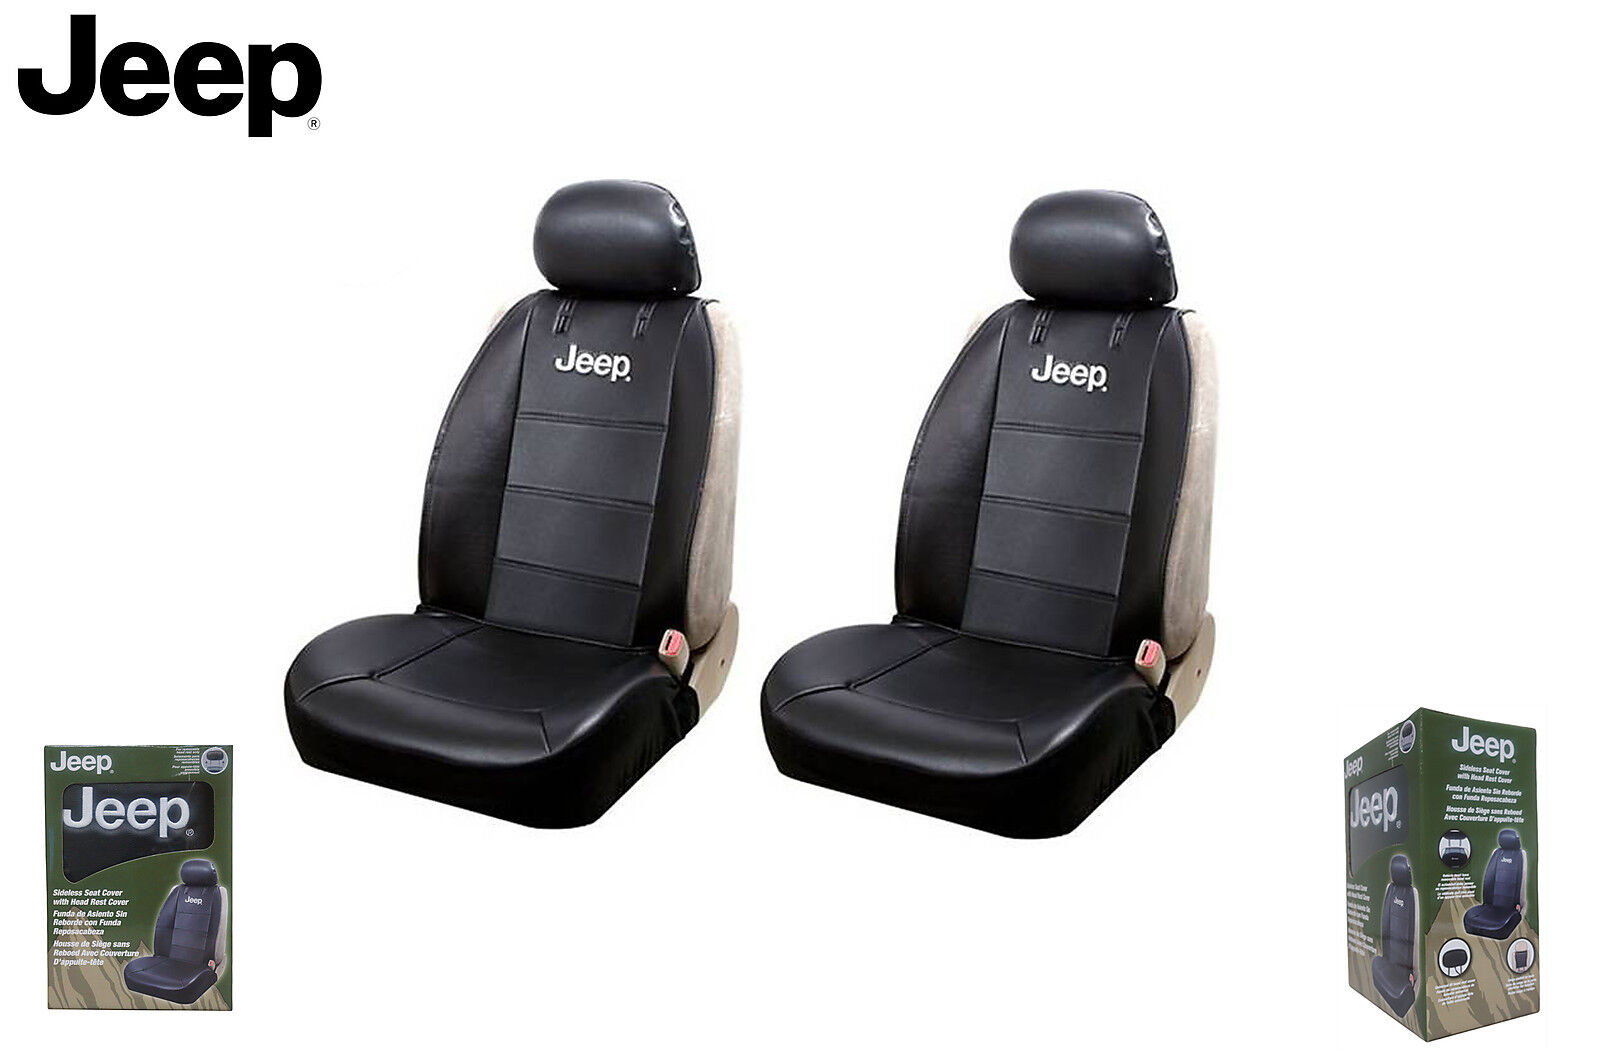 Jeep Elite Mopar Seat Covers Black Synthetic Leather Side Air bag Ready